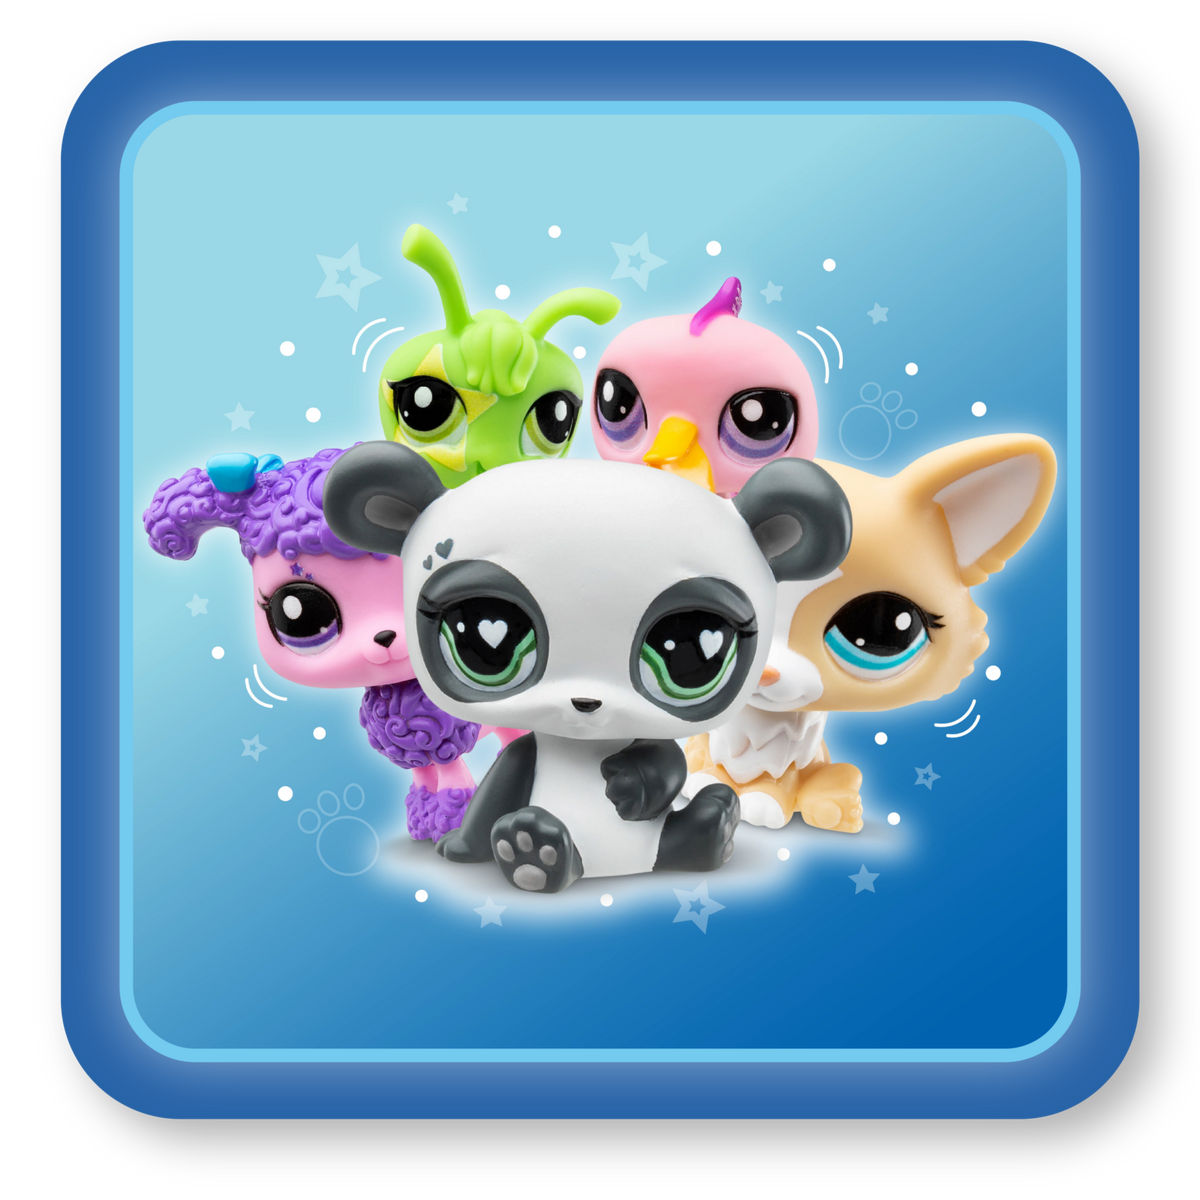 Newstalgia: Basic Fun!, Hasbro Ink Deal to Relaunch Littlest Pet Shop in  2024 - The Toy Book